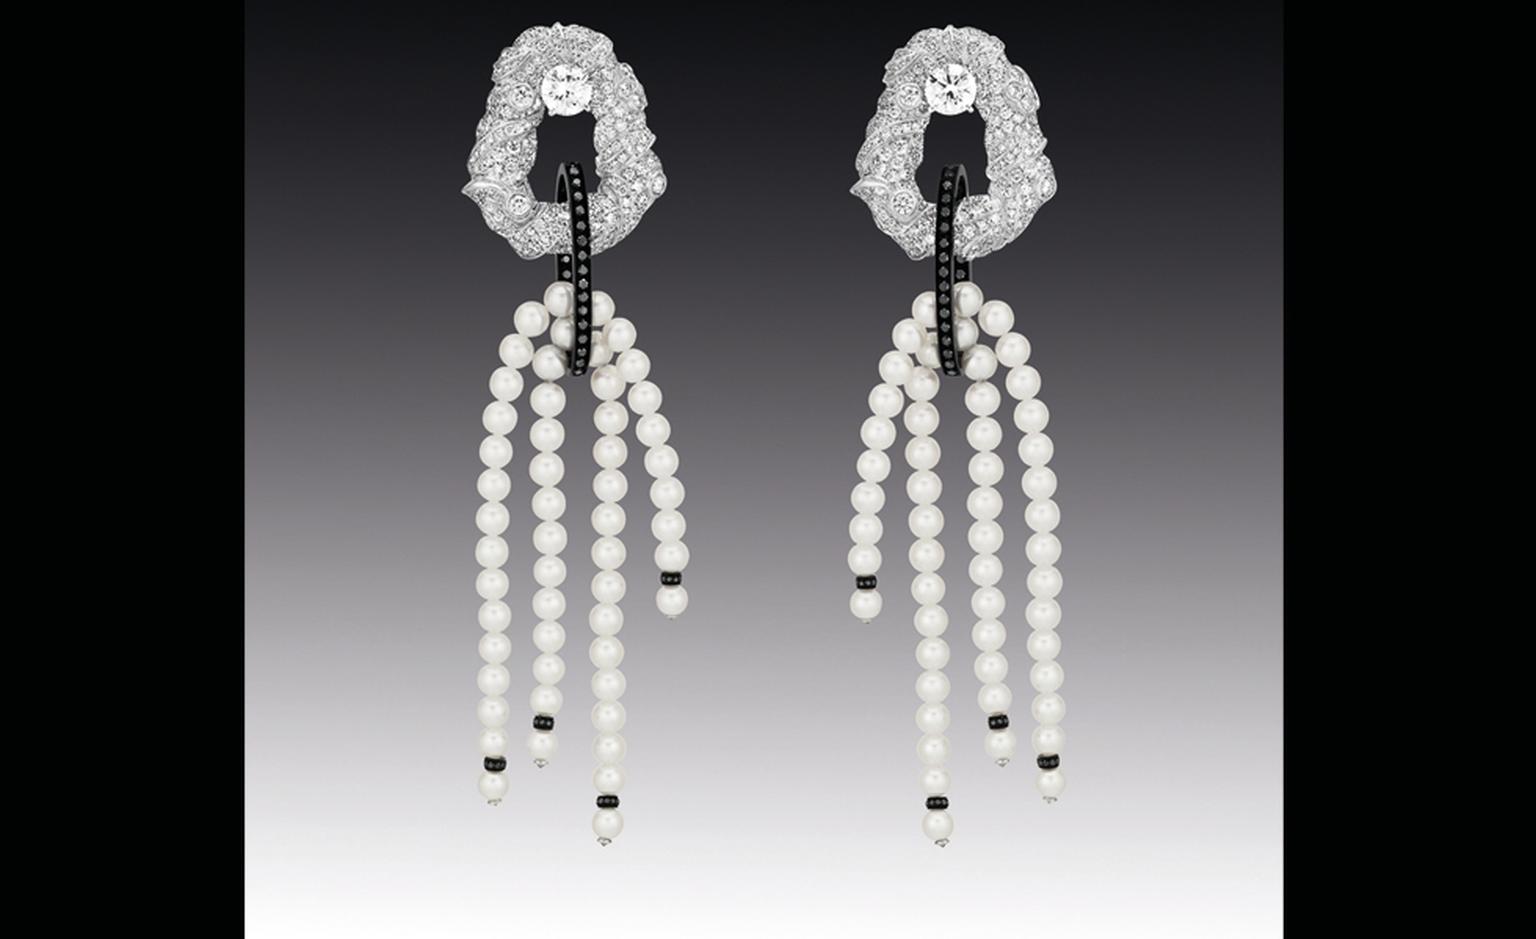 Chanel Contrastes collection: Nuage de Glace. Earrings in white gold, pearls with black and white diamonds.